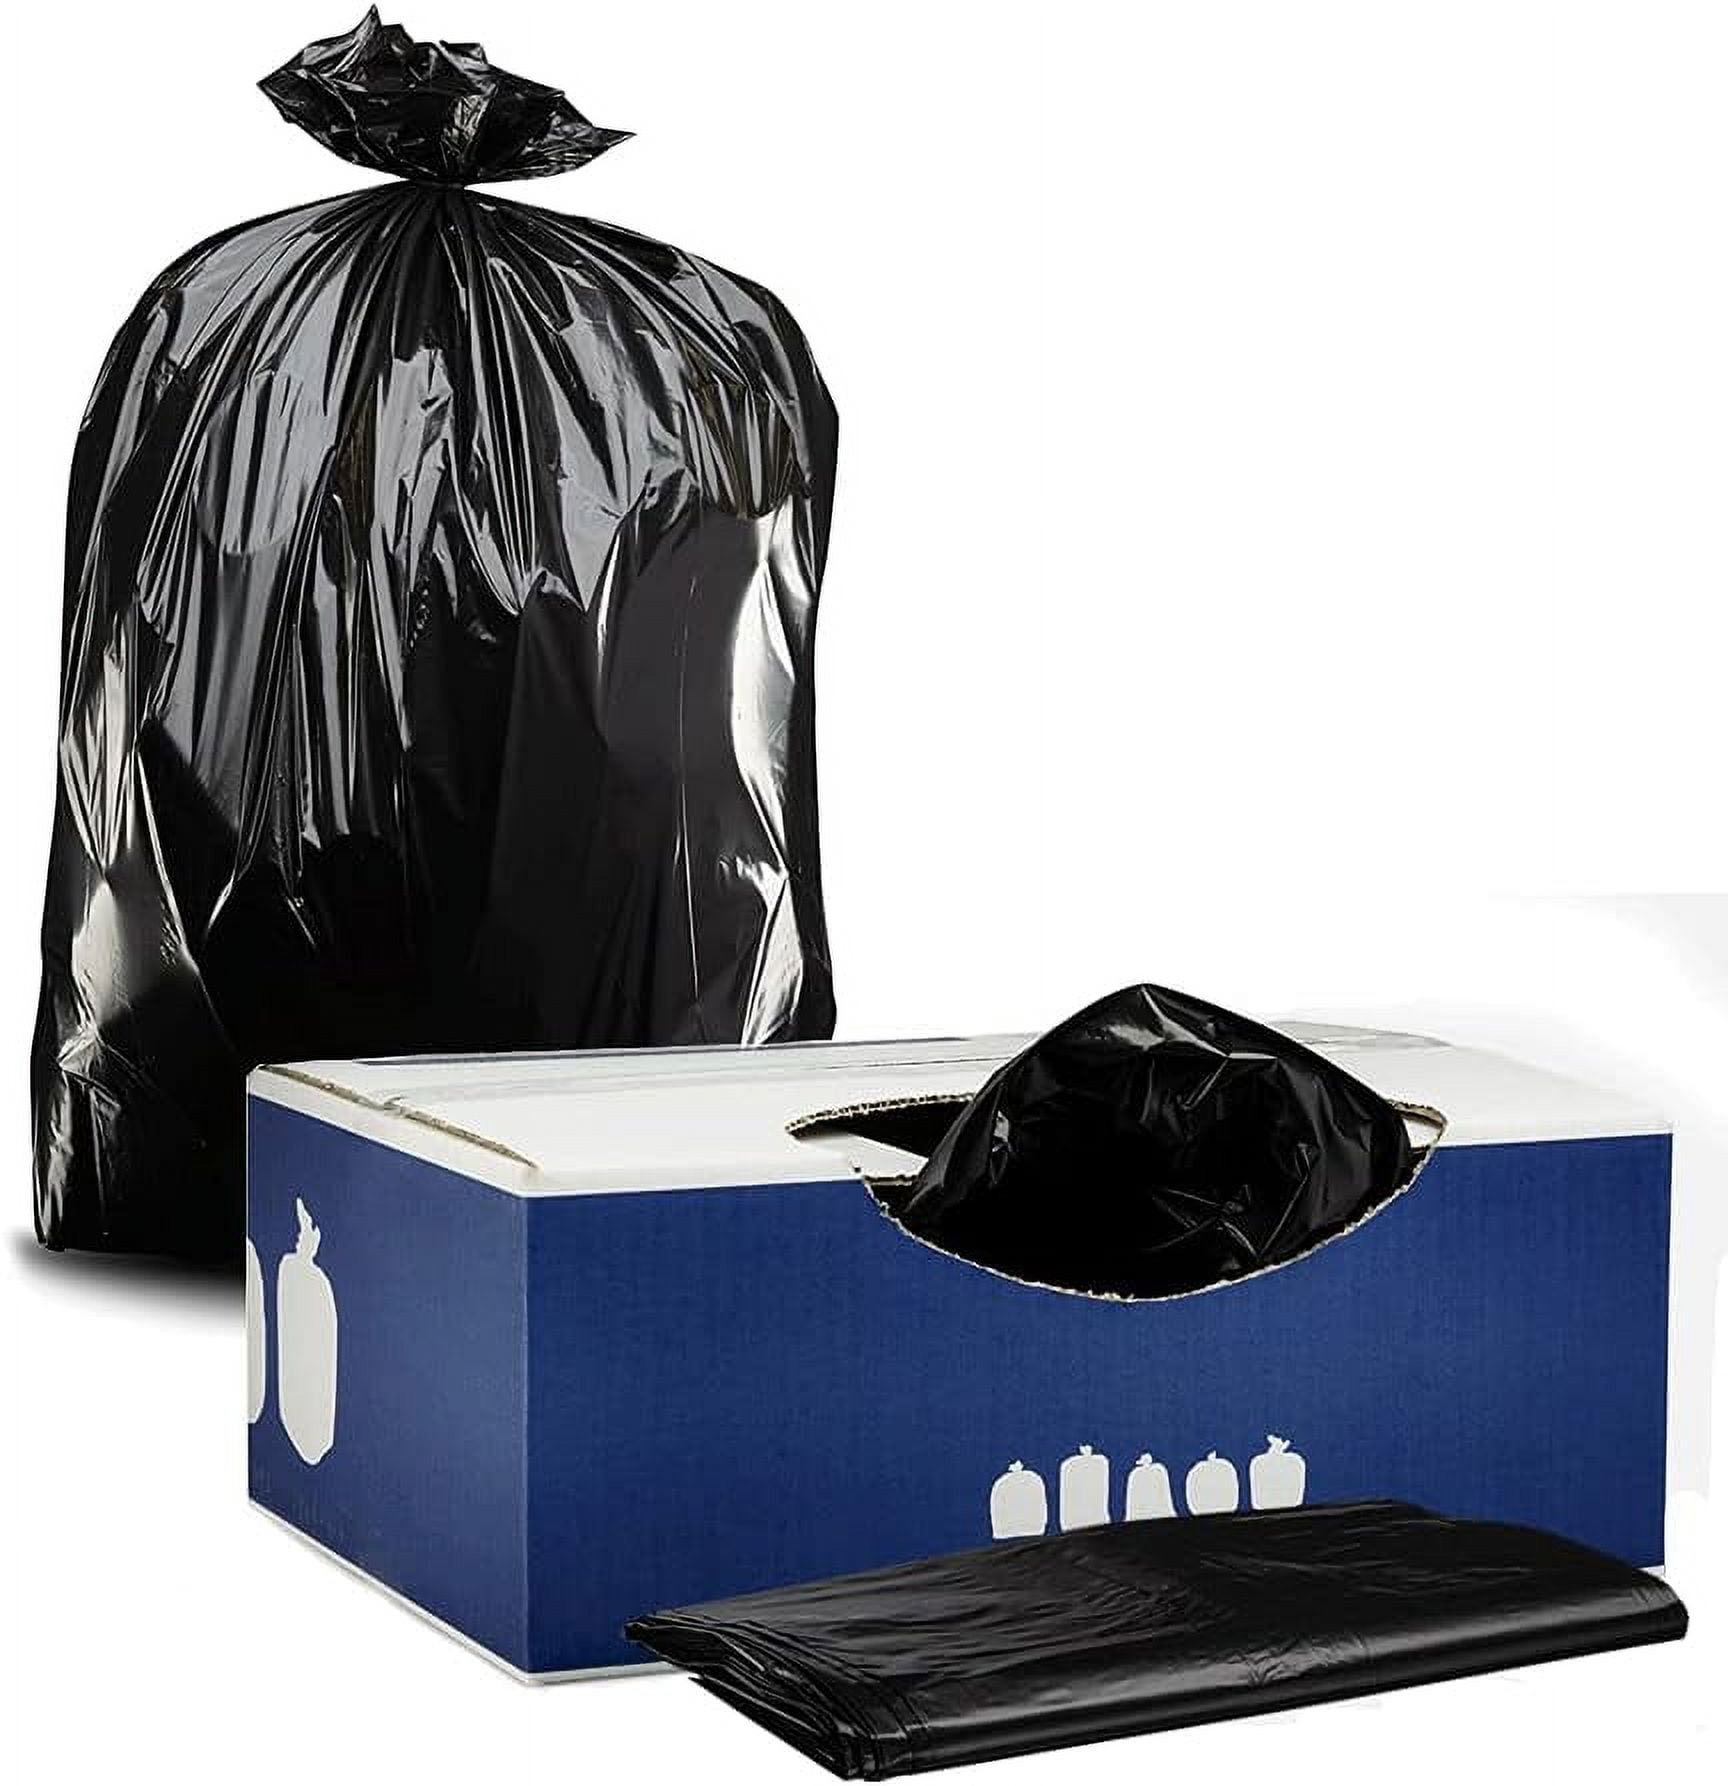 Plasticplace 55-60 Gallon Trash Bags 1.2 Mil Black Heavy Duty Garbage Can Liners 38” x 58” (50 Count)